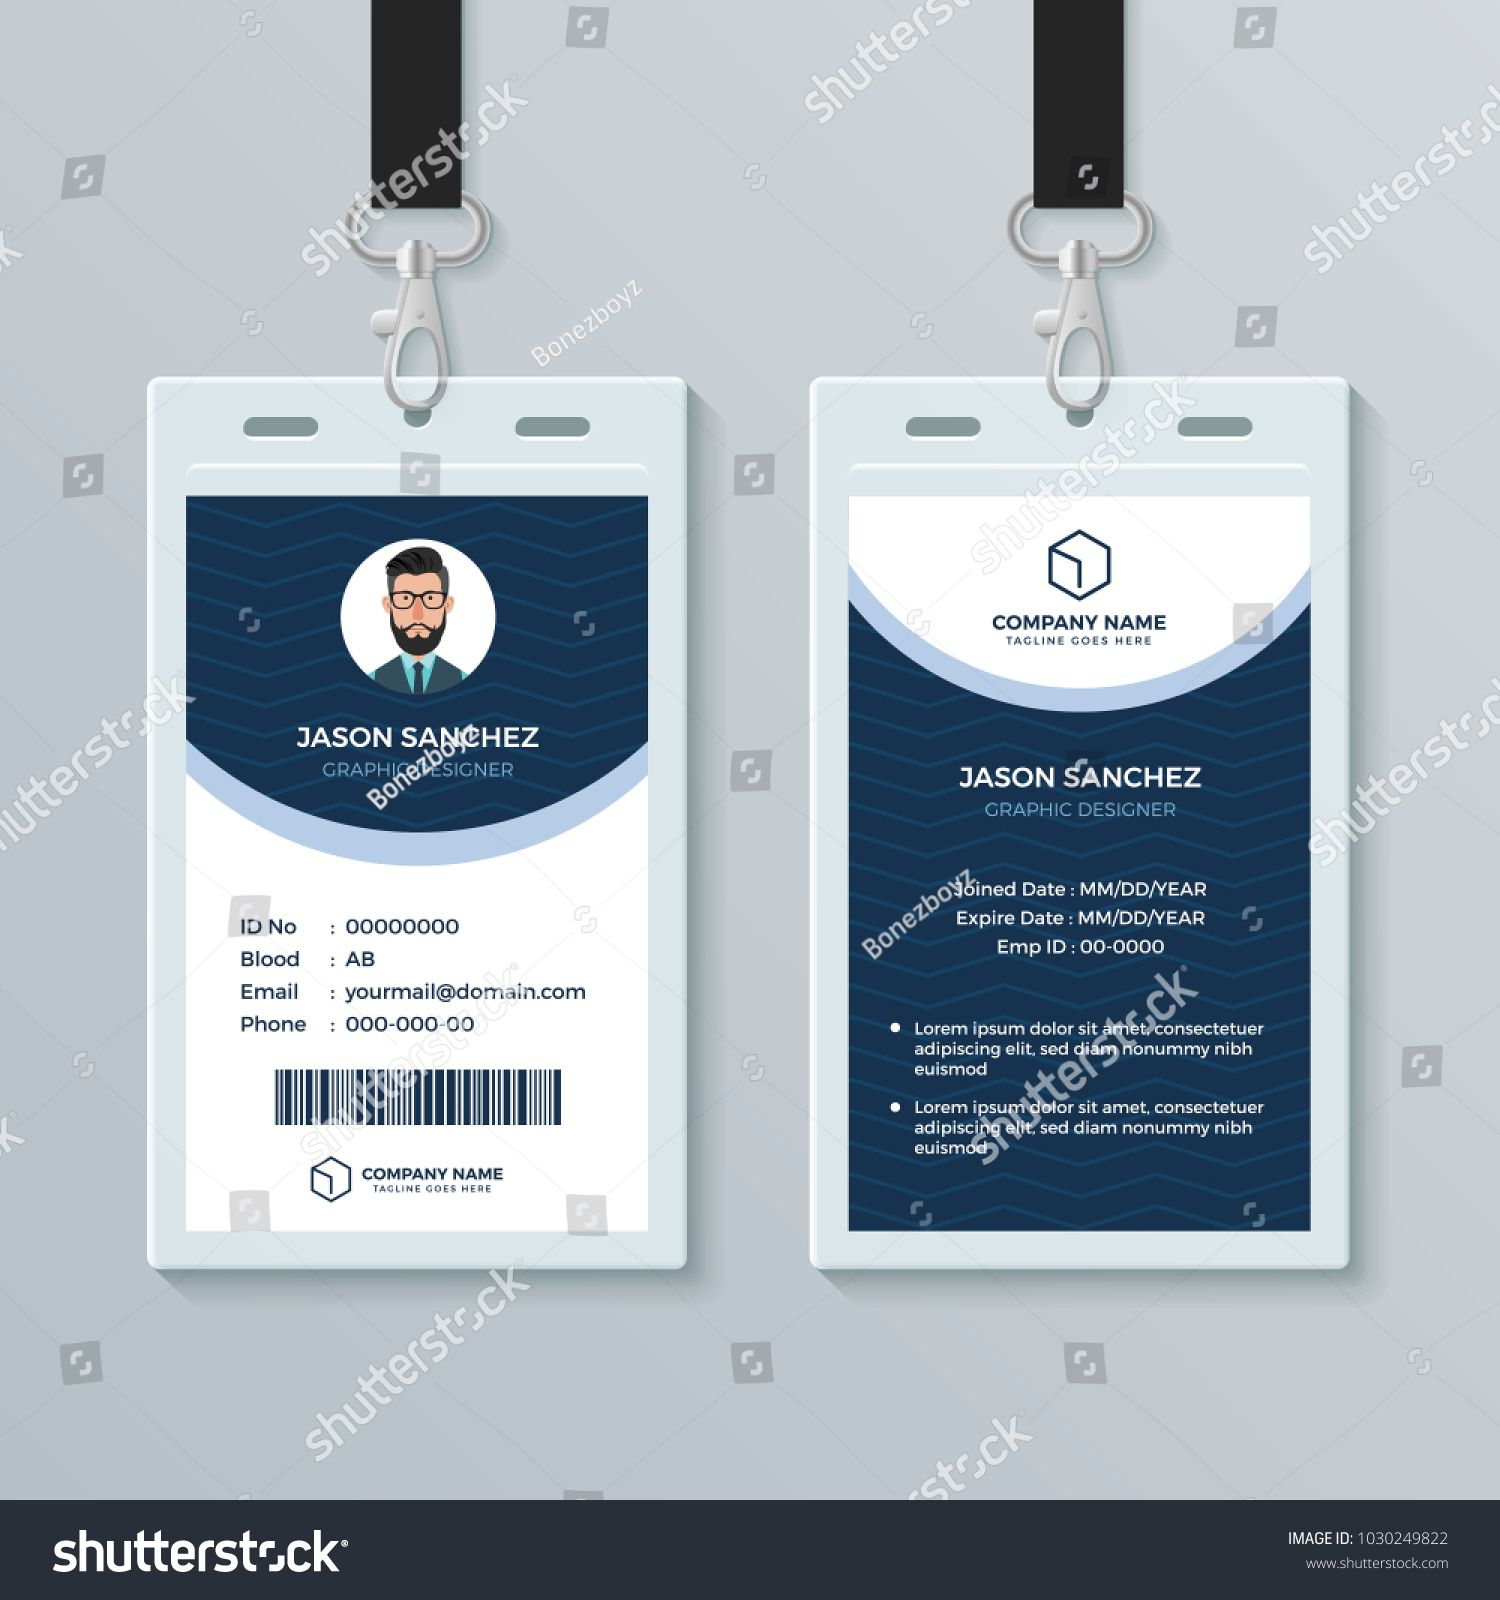 003 Free Id Card Template Fascinating Ideas Photoshop Throughout Free Id Card Template Word